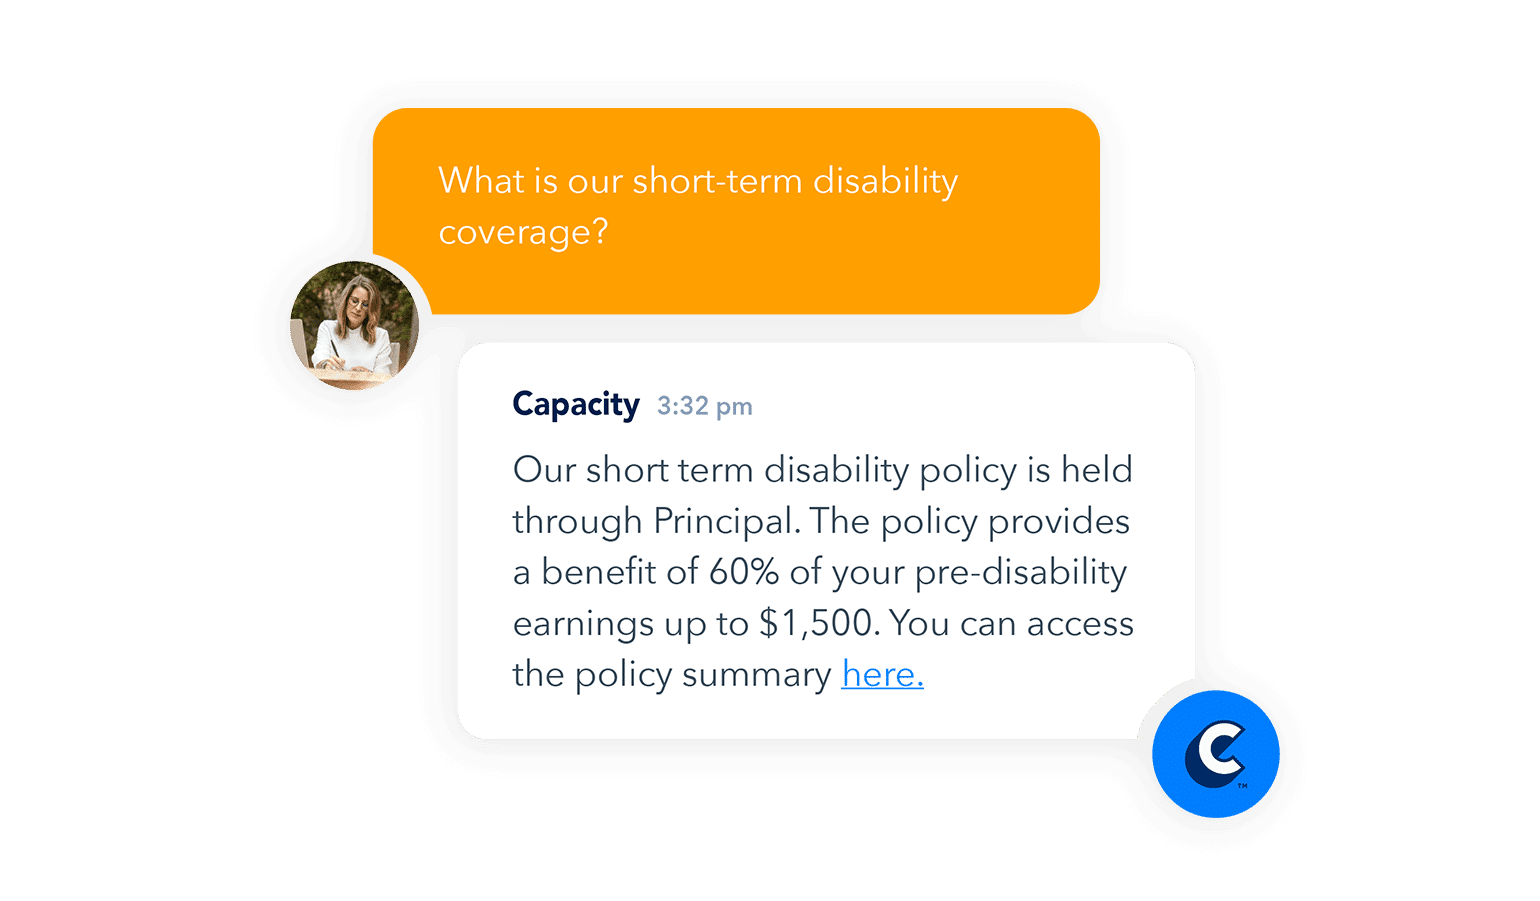 A conversation between Capacity and an employee asking about short-term disability coverage